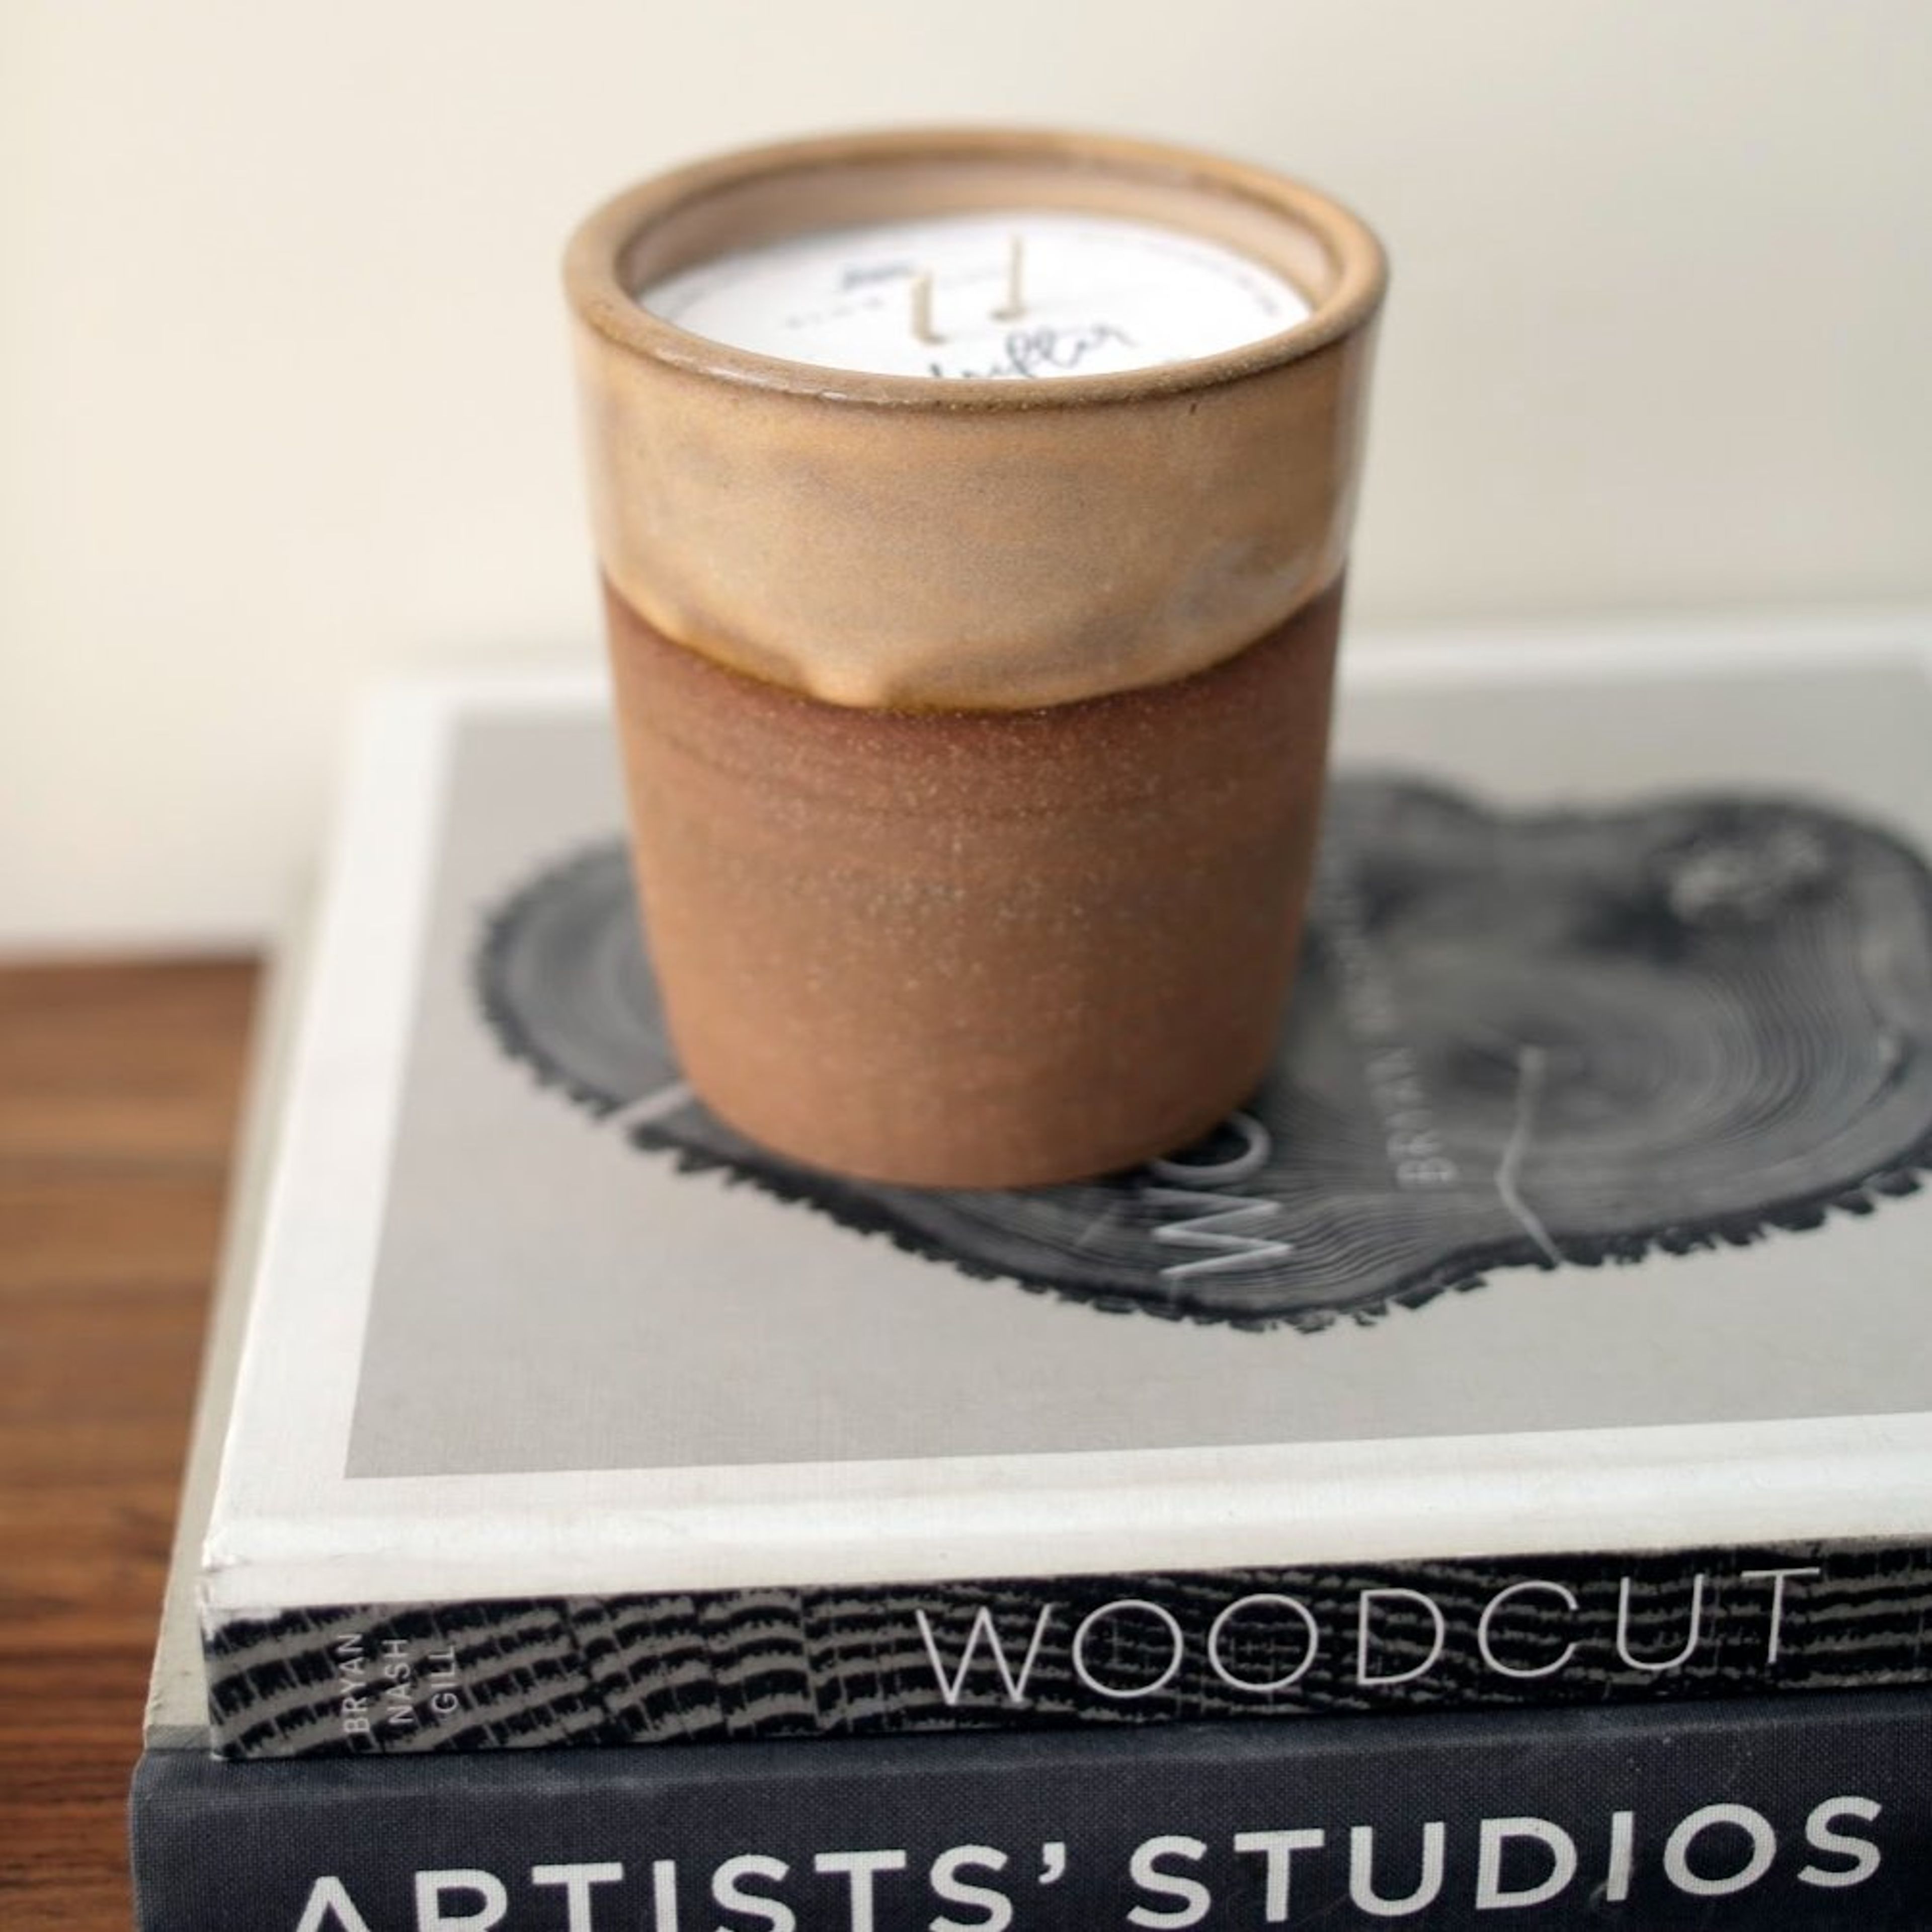 Julie Kittredge x Slow Made: Limited Edition Candle